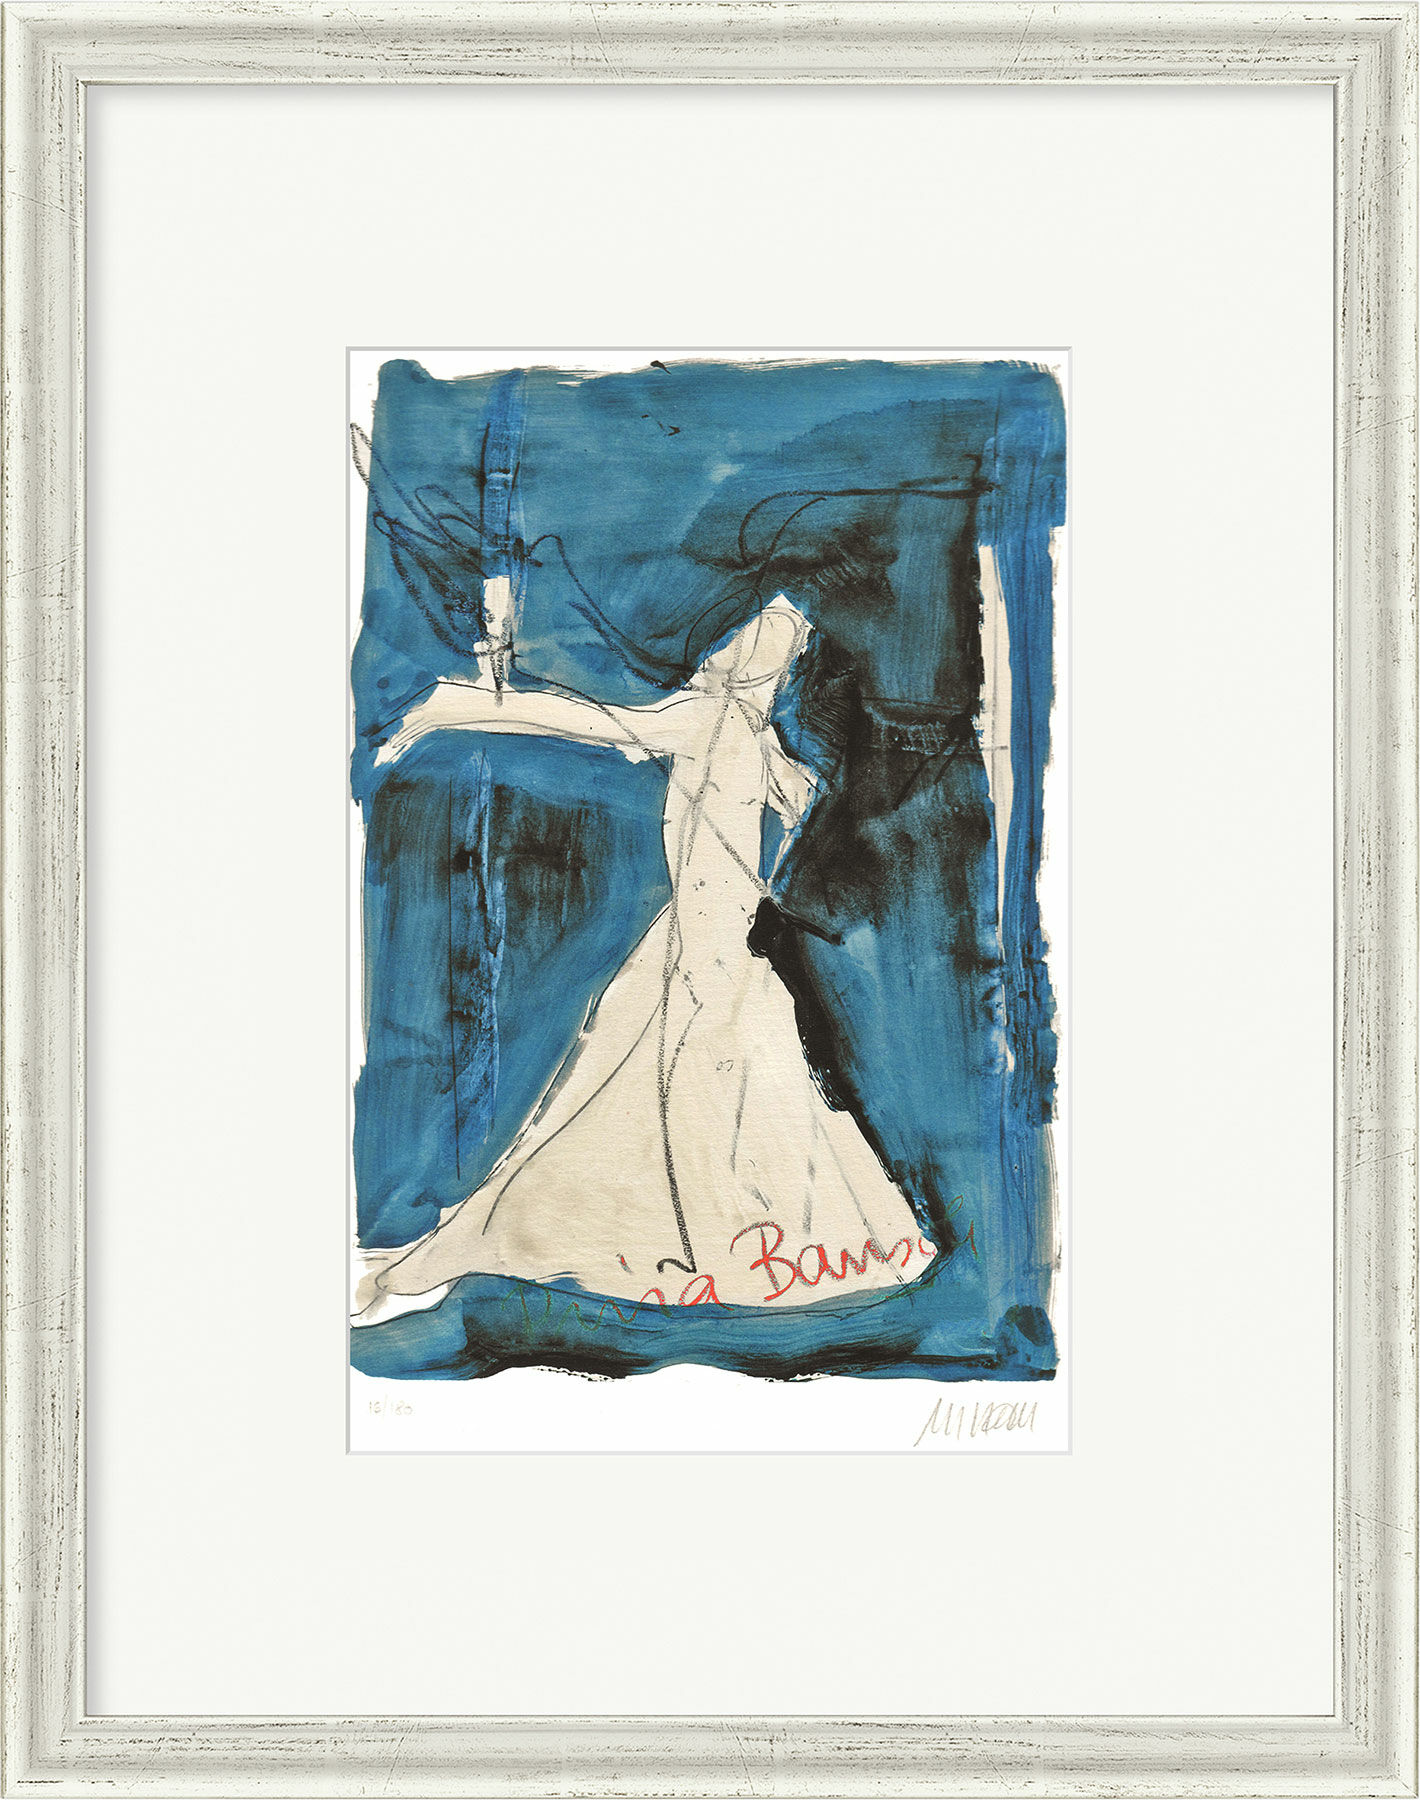 Picture "Pina Bausch - Almost Anything Can Be Dance" (2017), silver-coloured framed version by Armin Mueller-Stahl